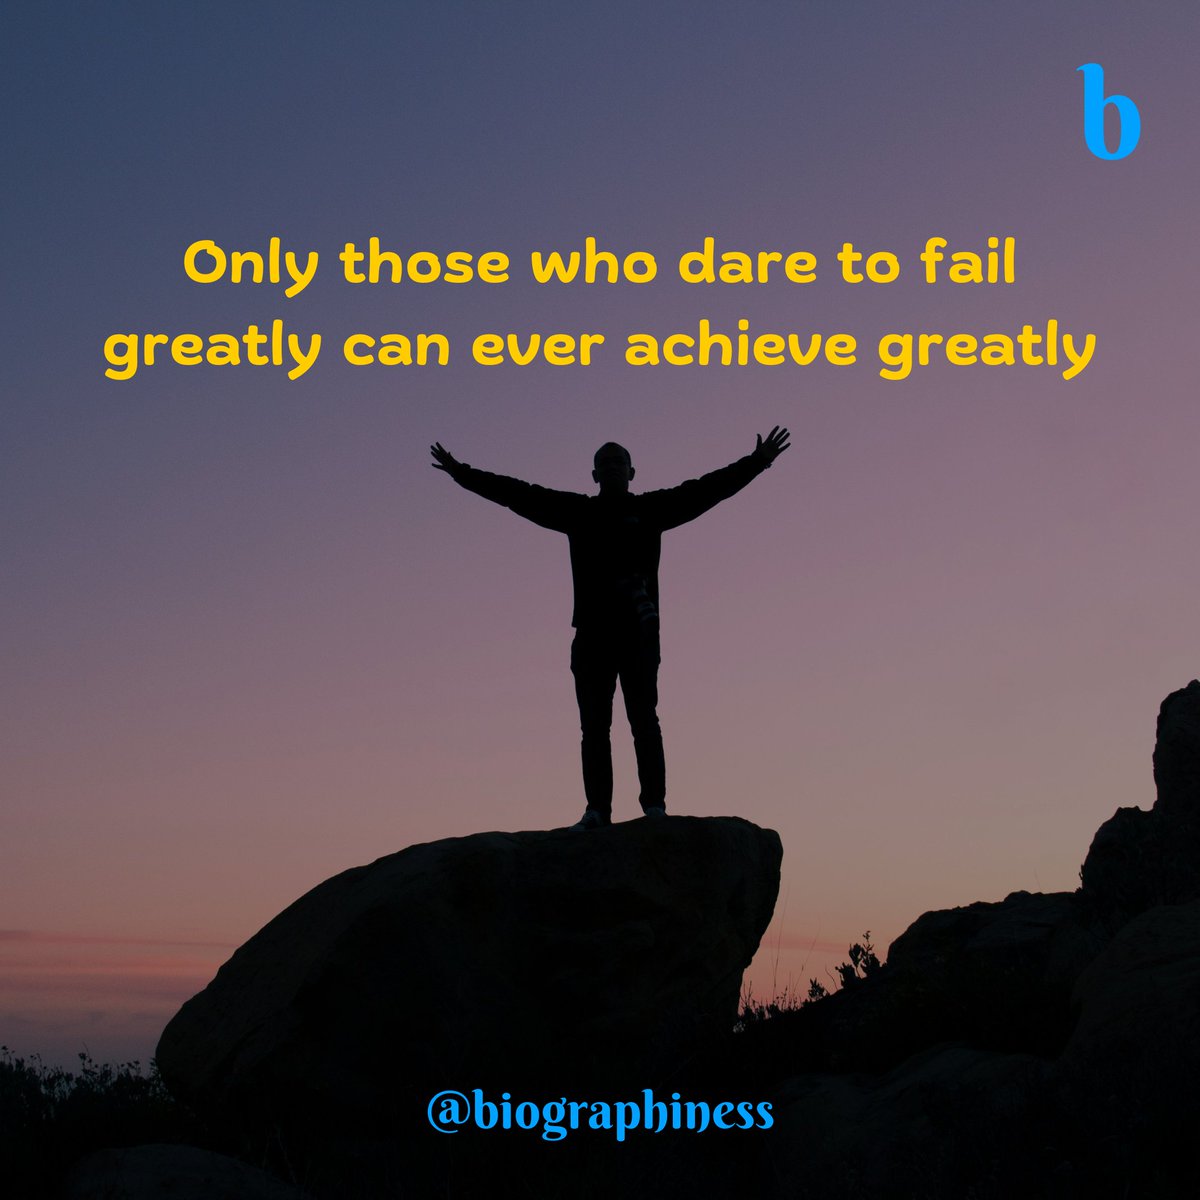 Rise above the odds and let your dreams soar🚀💪
Follow👉 @biographiness

#Biographiness #Biograghines #DreamBig #SuccessJourney #MotivationMagic #AchieveMore #InspireDaily #GoalGetter #ResilienceRules #CourageCounts #Empowerment #LifeGoals